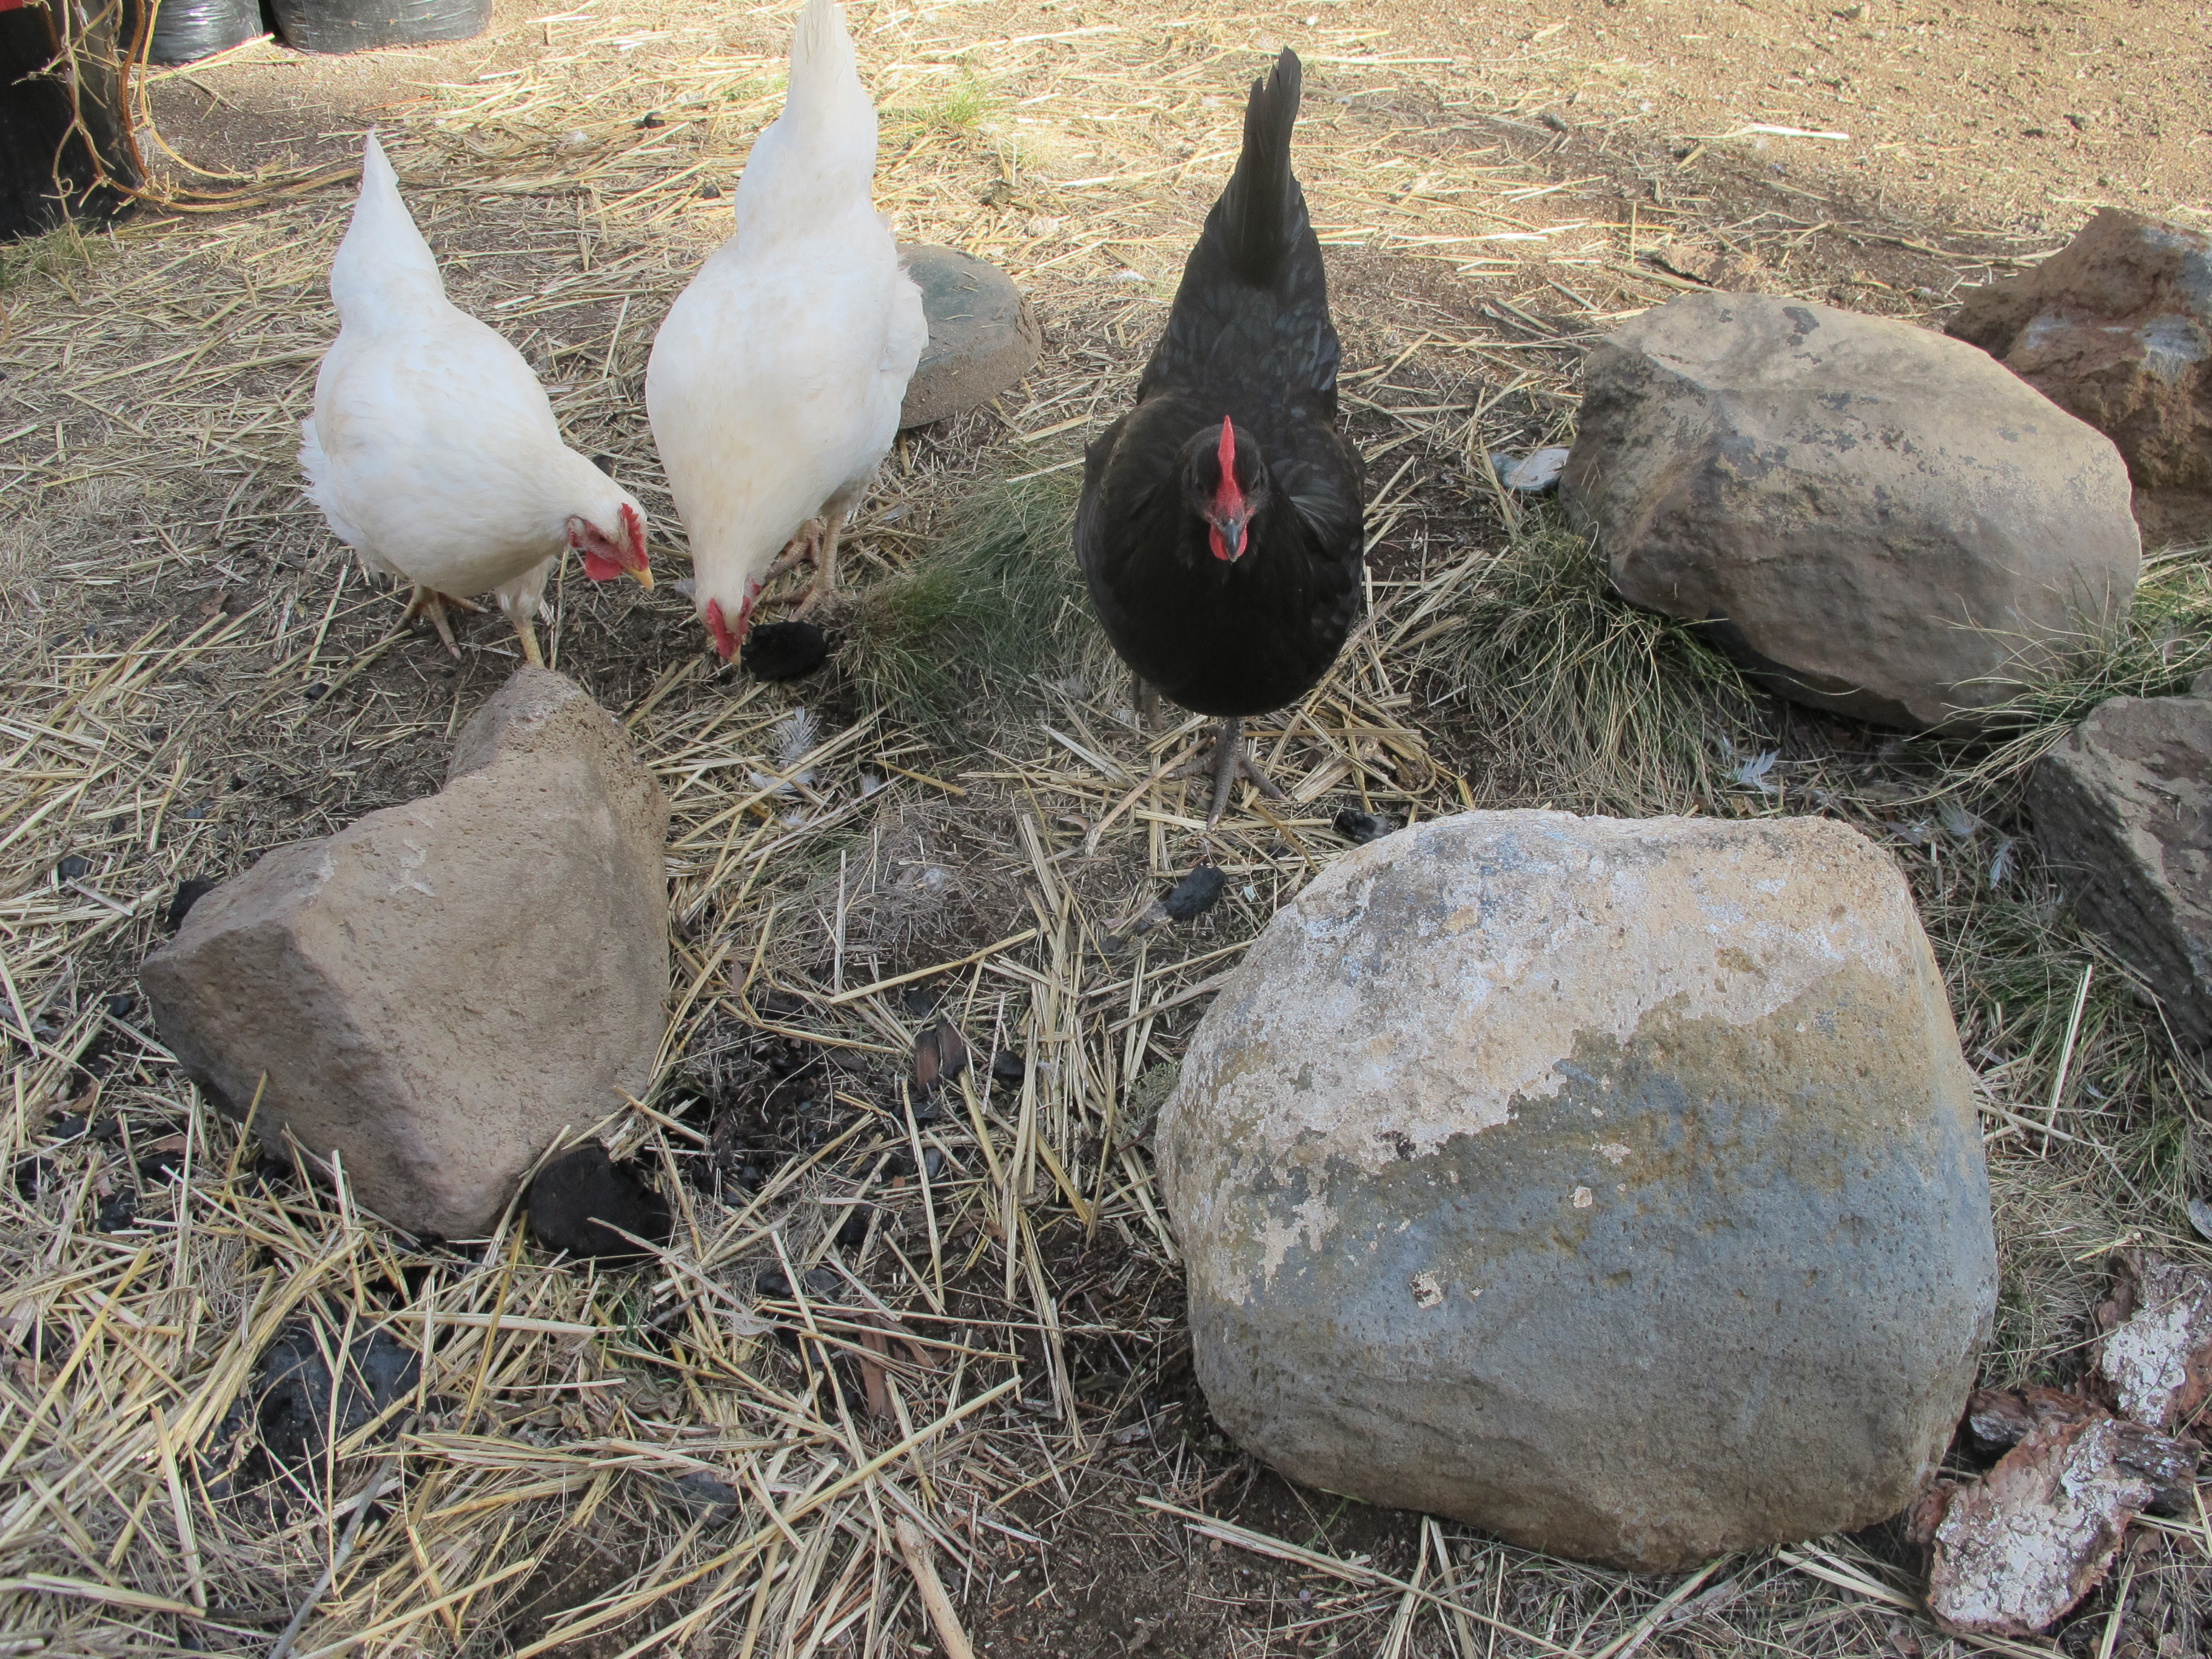 All of our hens: Mullet, Suzy Q and Obsidian.